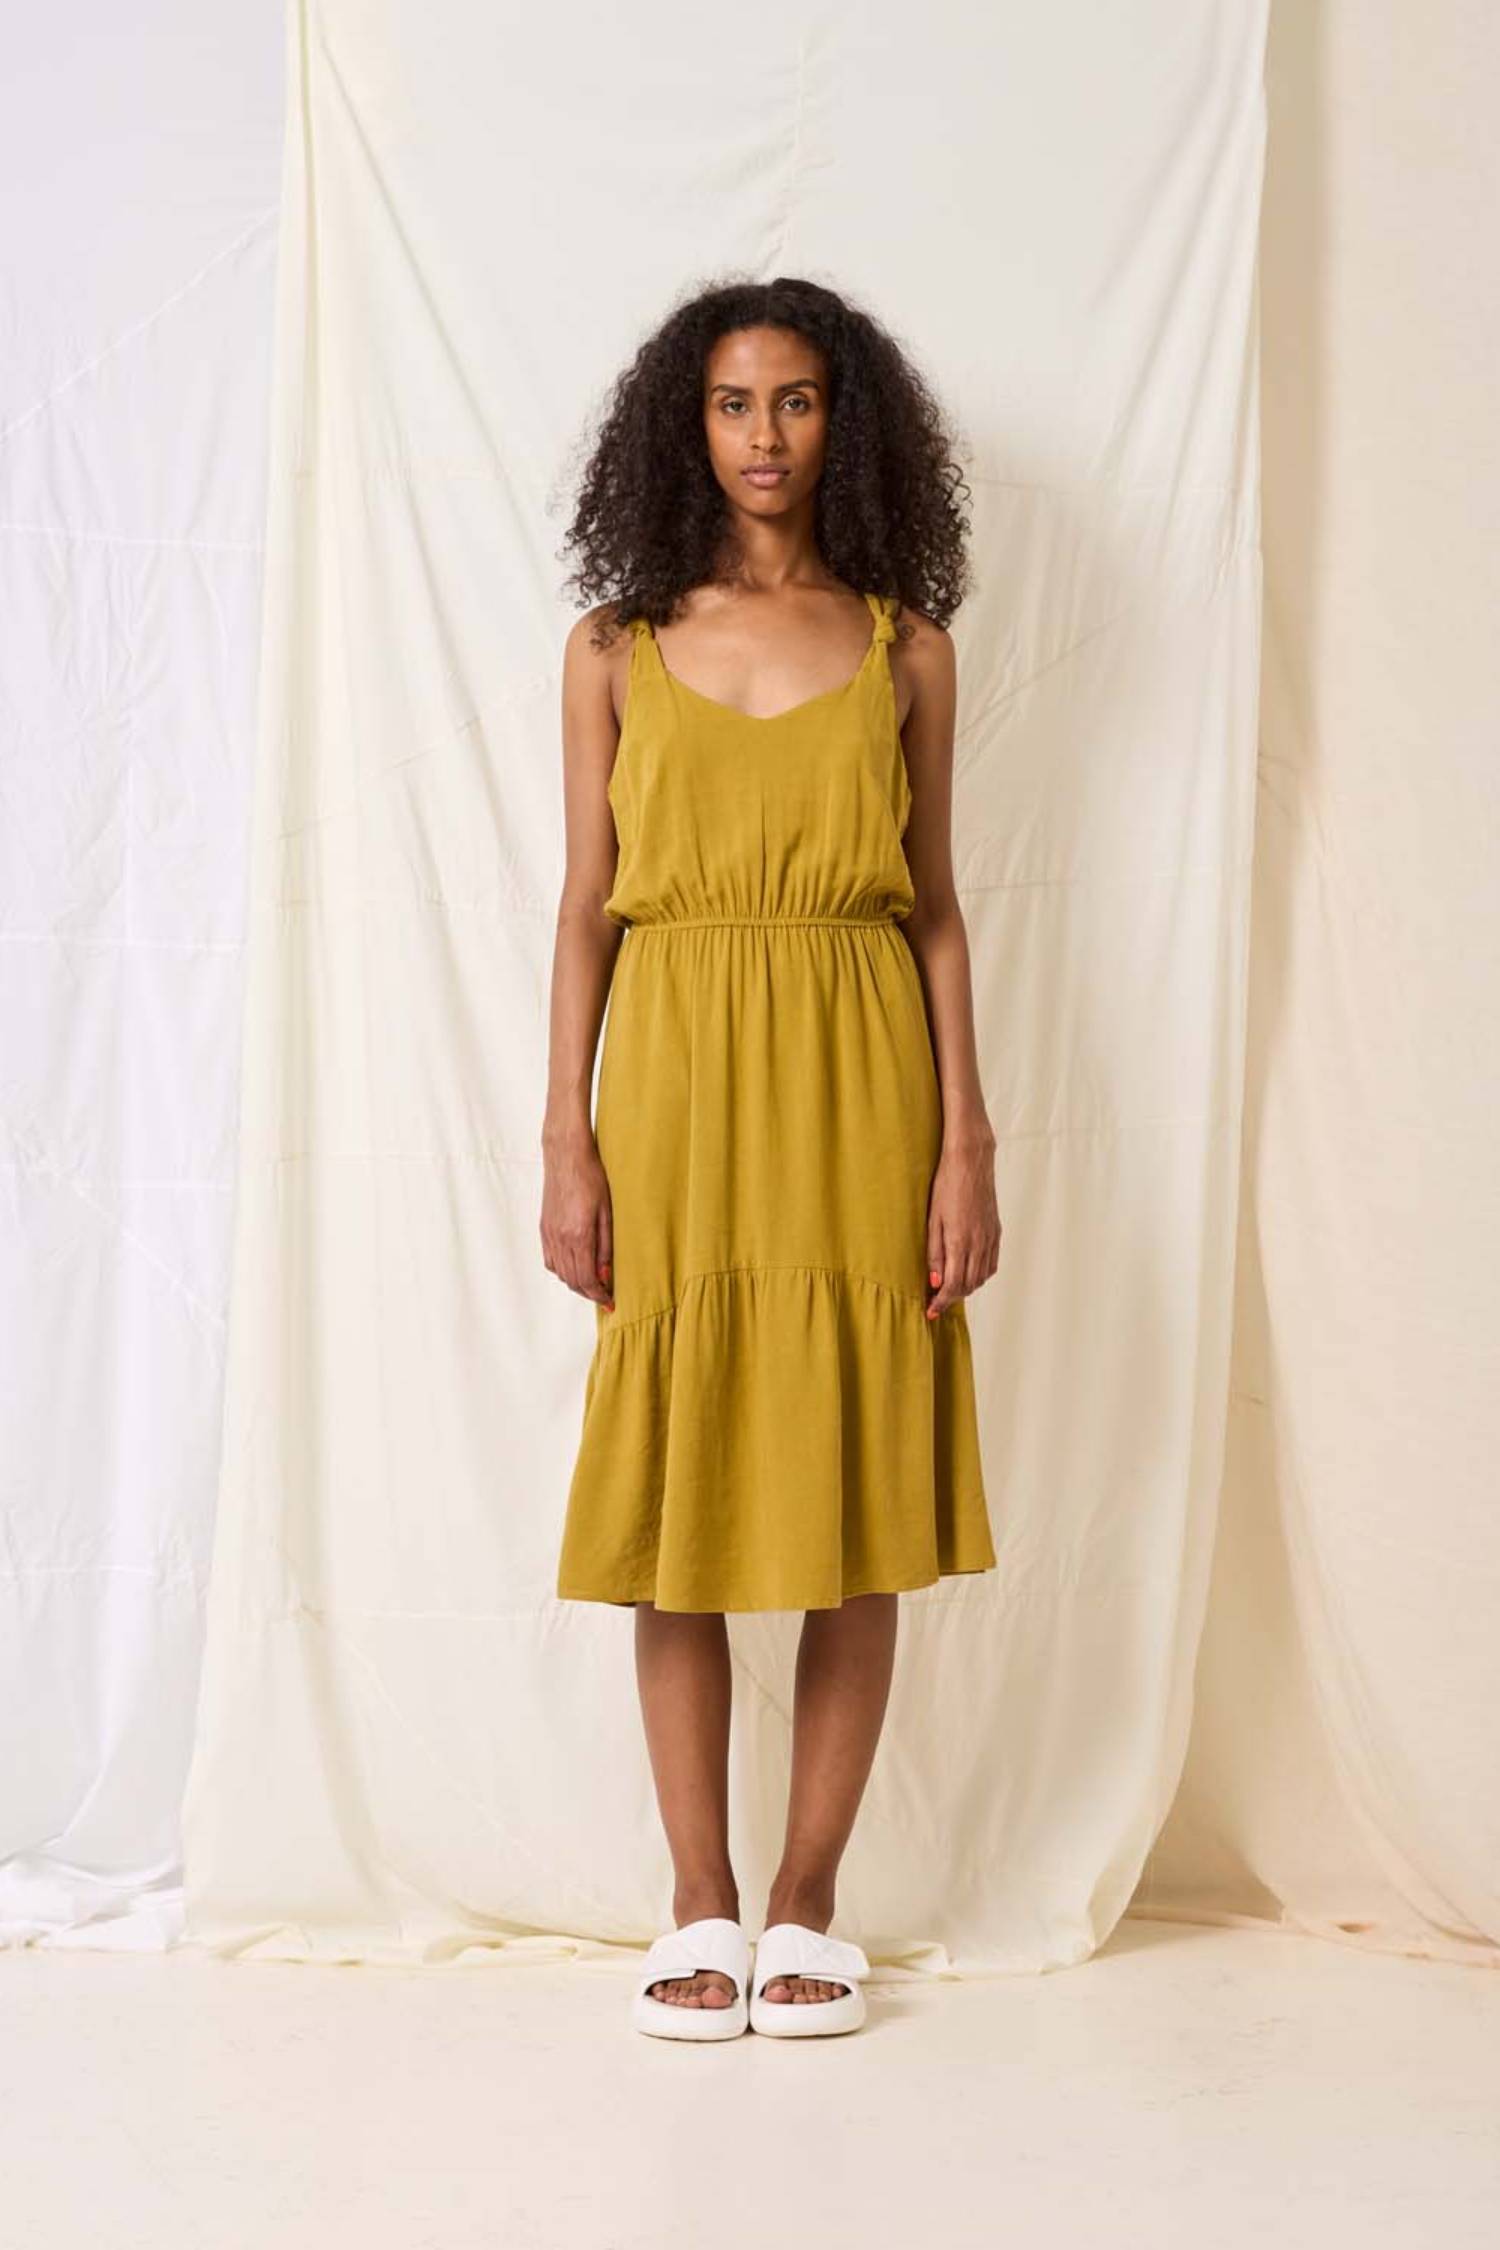 Rubia Dress by Cokluch, Pistachio, tank dress, knotted straps, rounded V-neck, elastic waist, midi-length, ruffled hem, viscose/linen, sizes XS to XL, made in Montreal